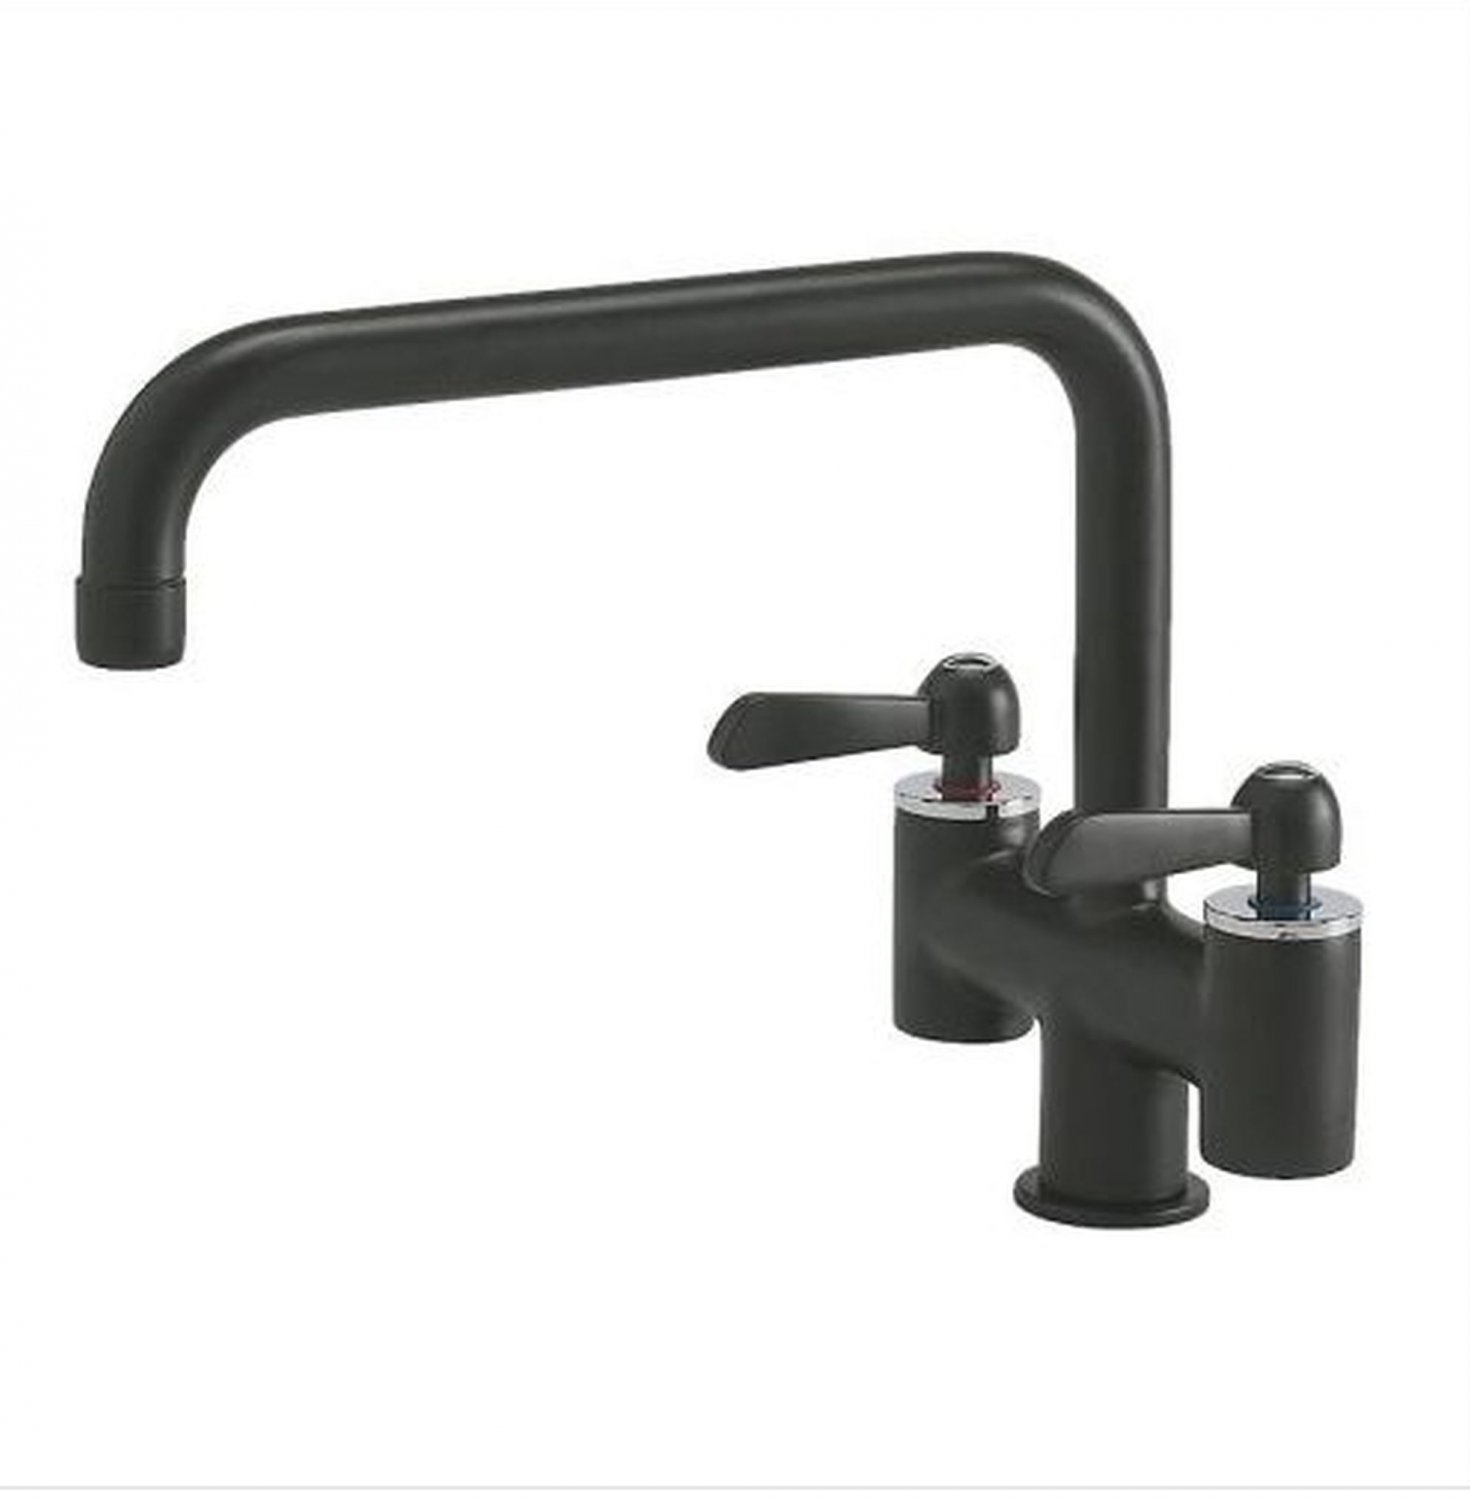 Ikea Loviken Dual Control Kitchen Faucet Black Brass Ceramic Contemporary Cottage Country